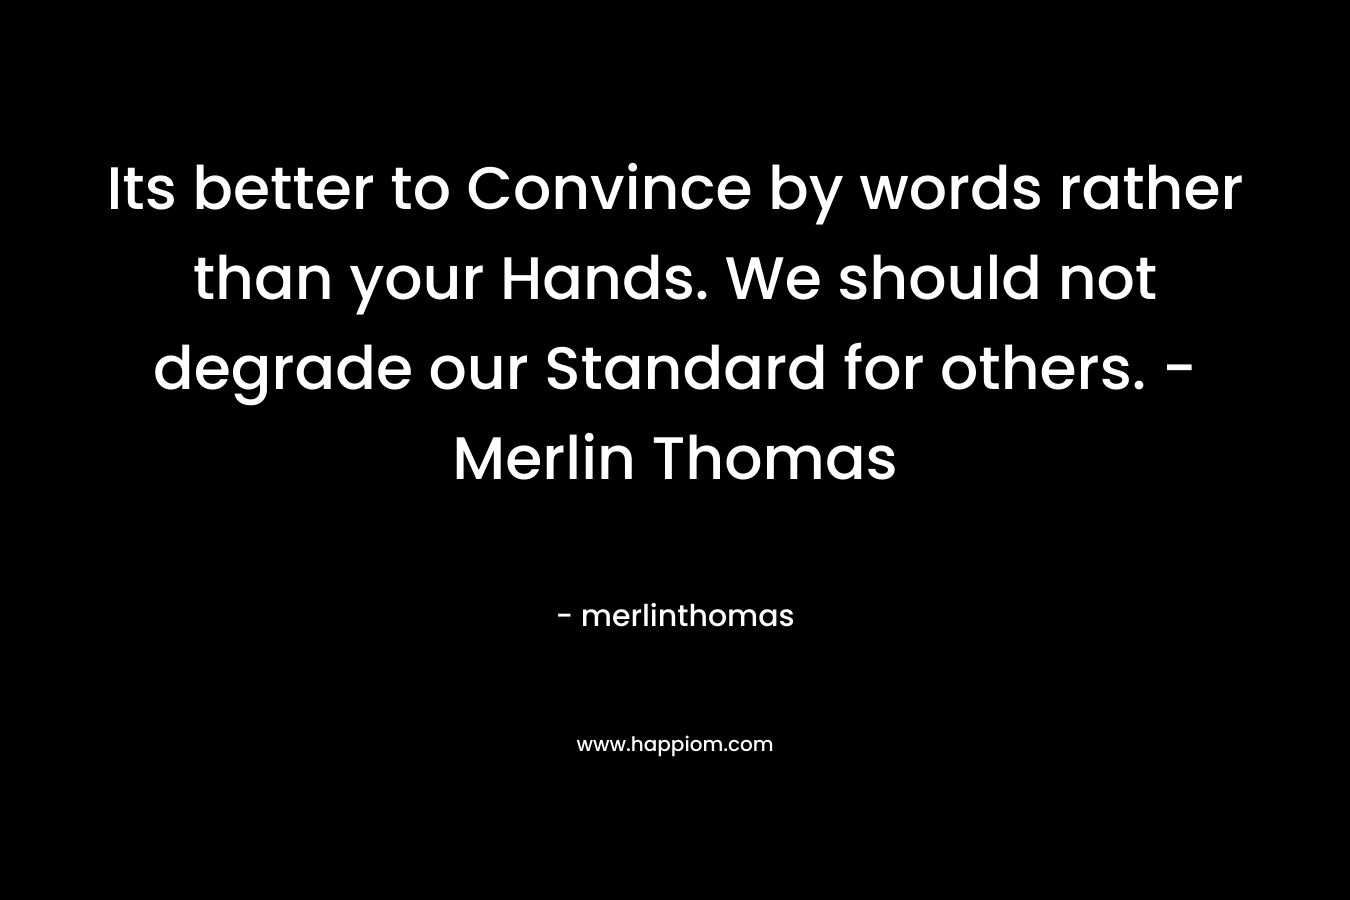 Its better to Convince by words rather than your Hands. We should not degrade our Standard for others. - Merlin Thomas